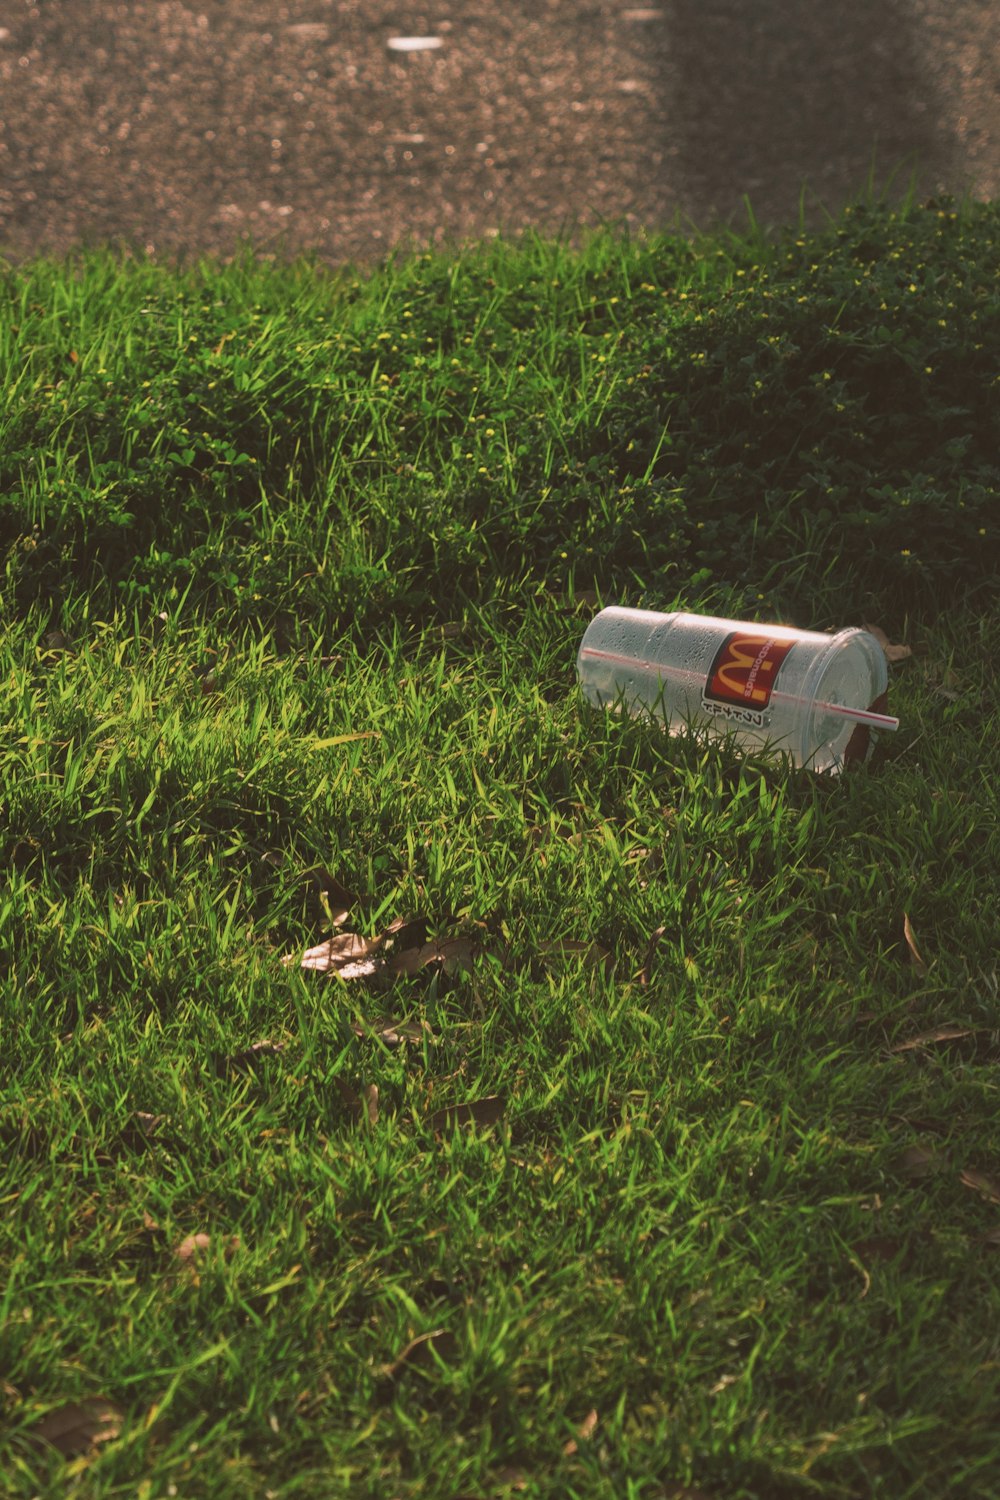 a bottle laying on the ground in the grass